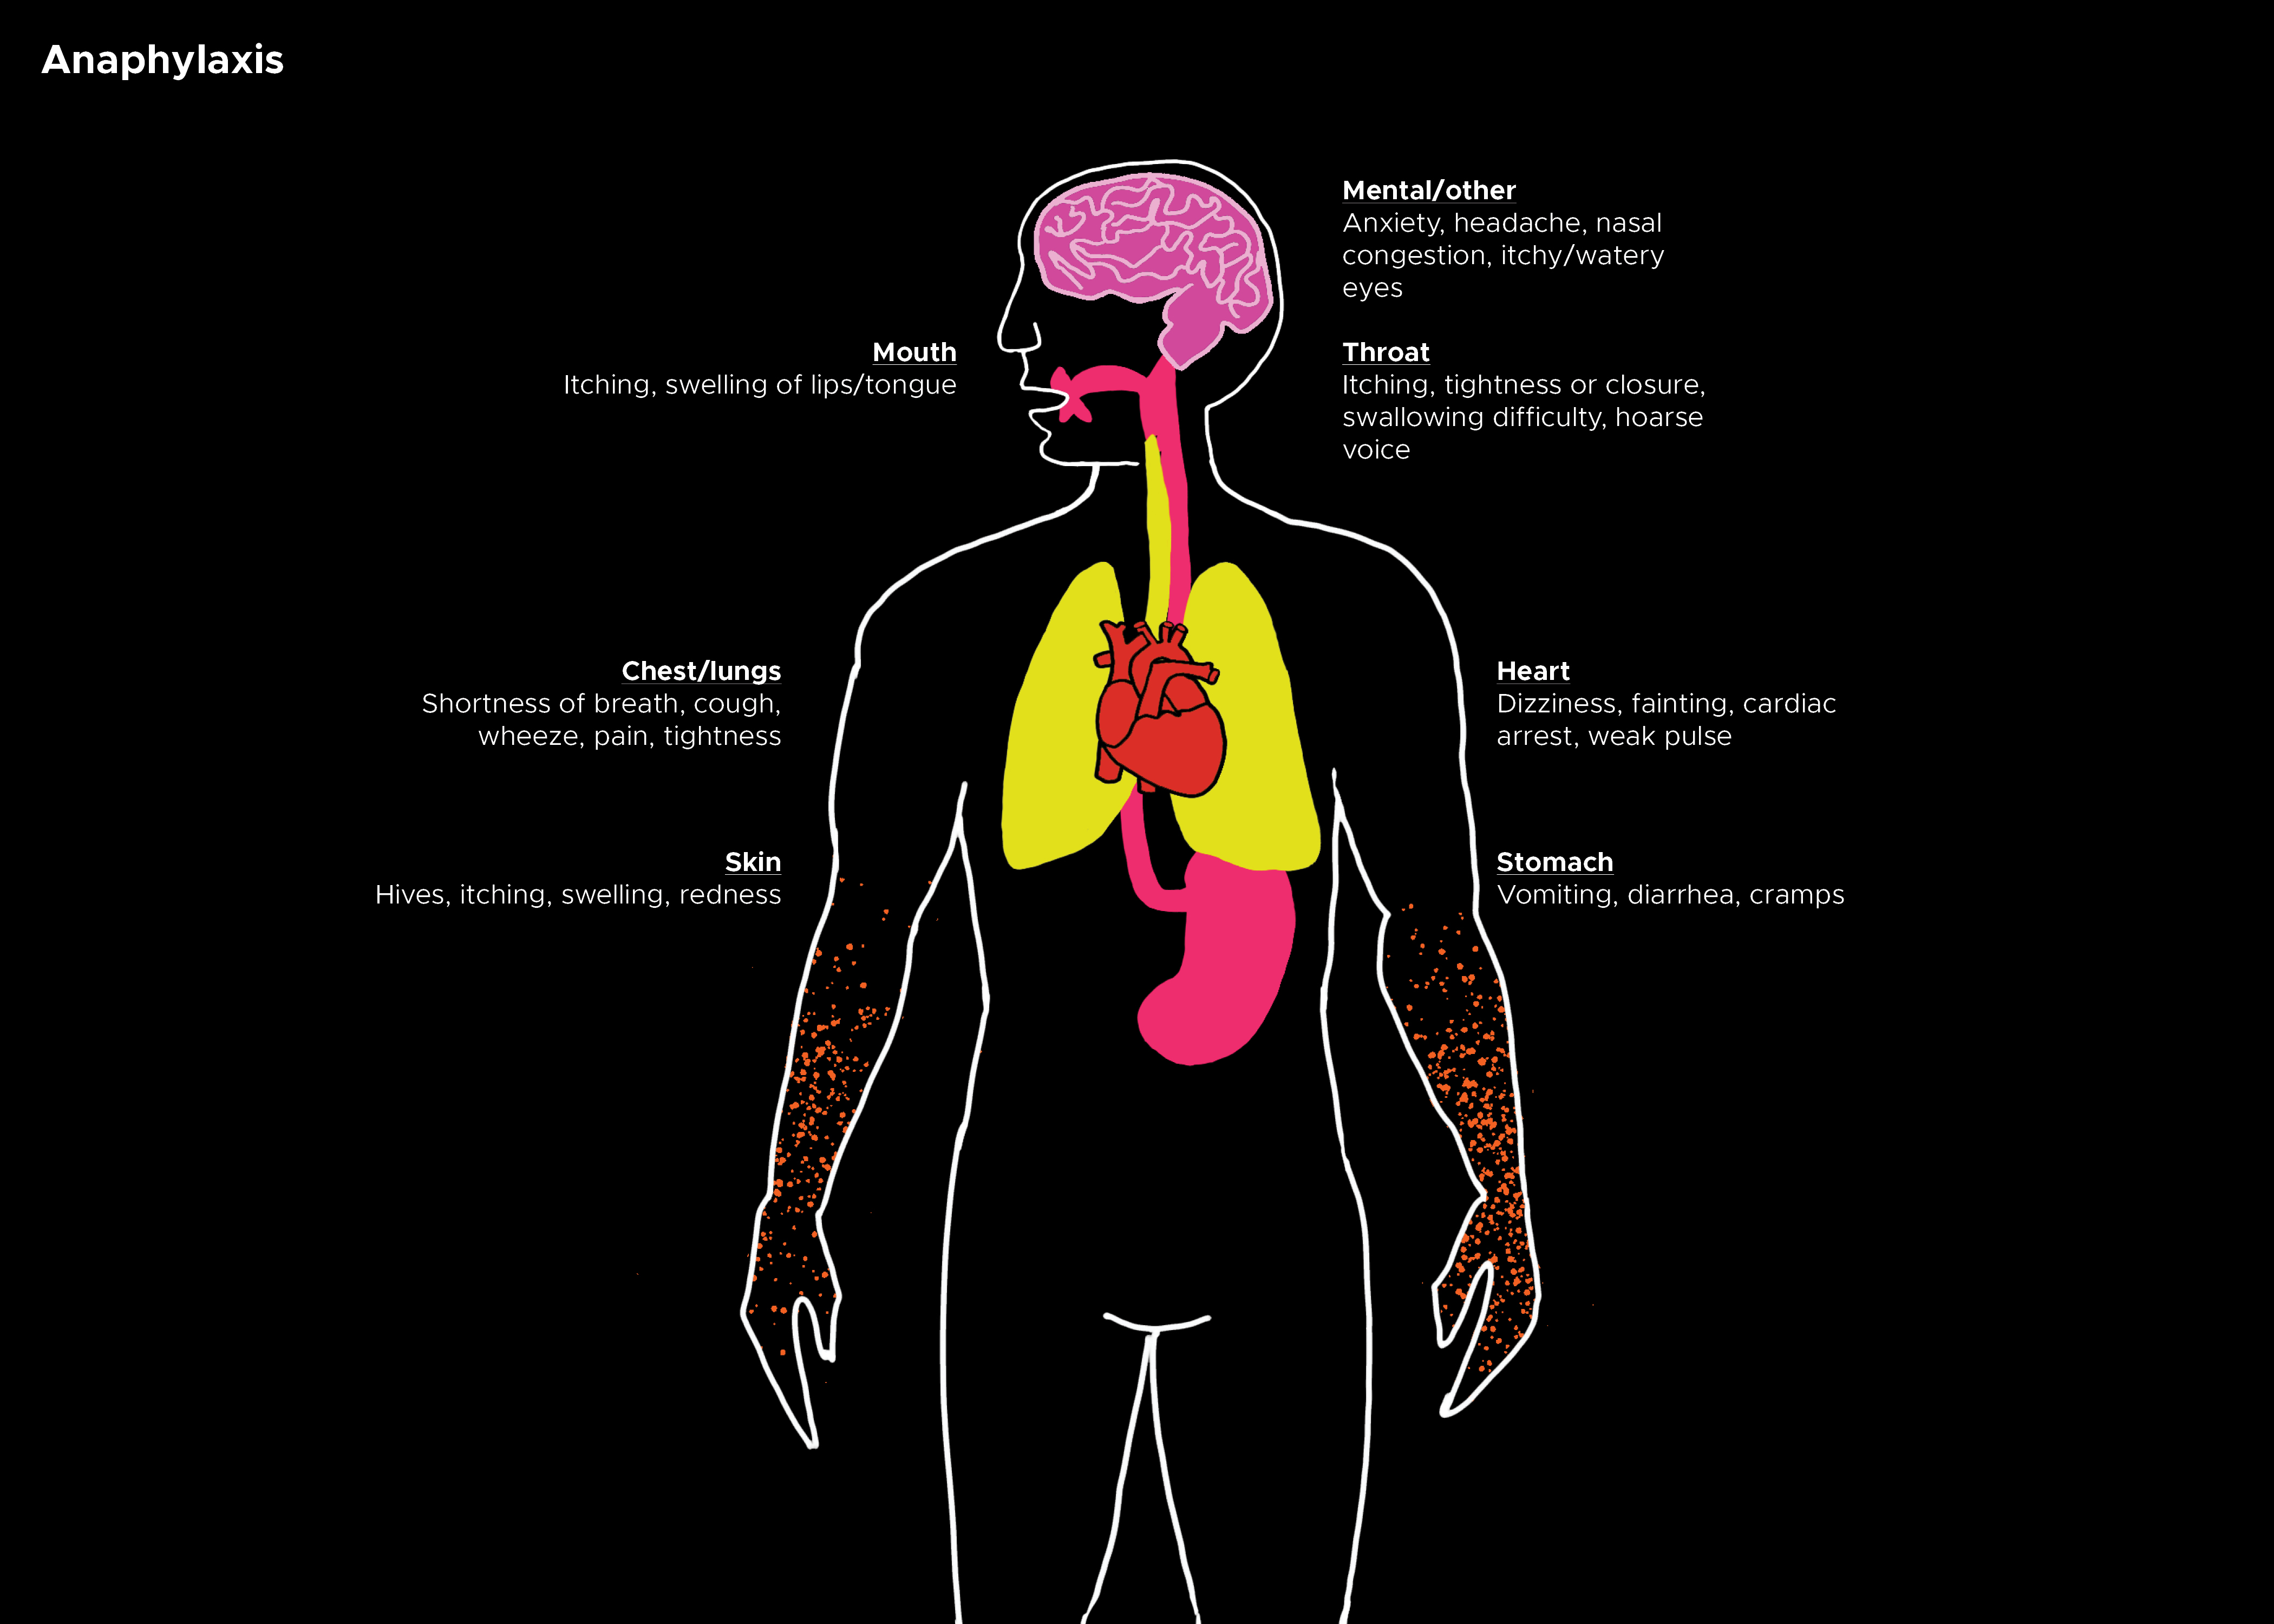 Chart depicting anaphylaxis in different areas of the body. Hives, difficulty breathing, increased heart rate, anxiety